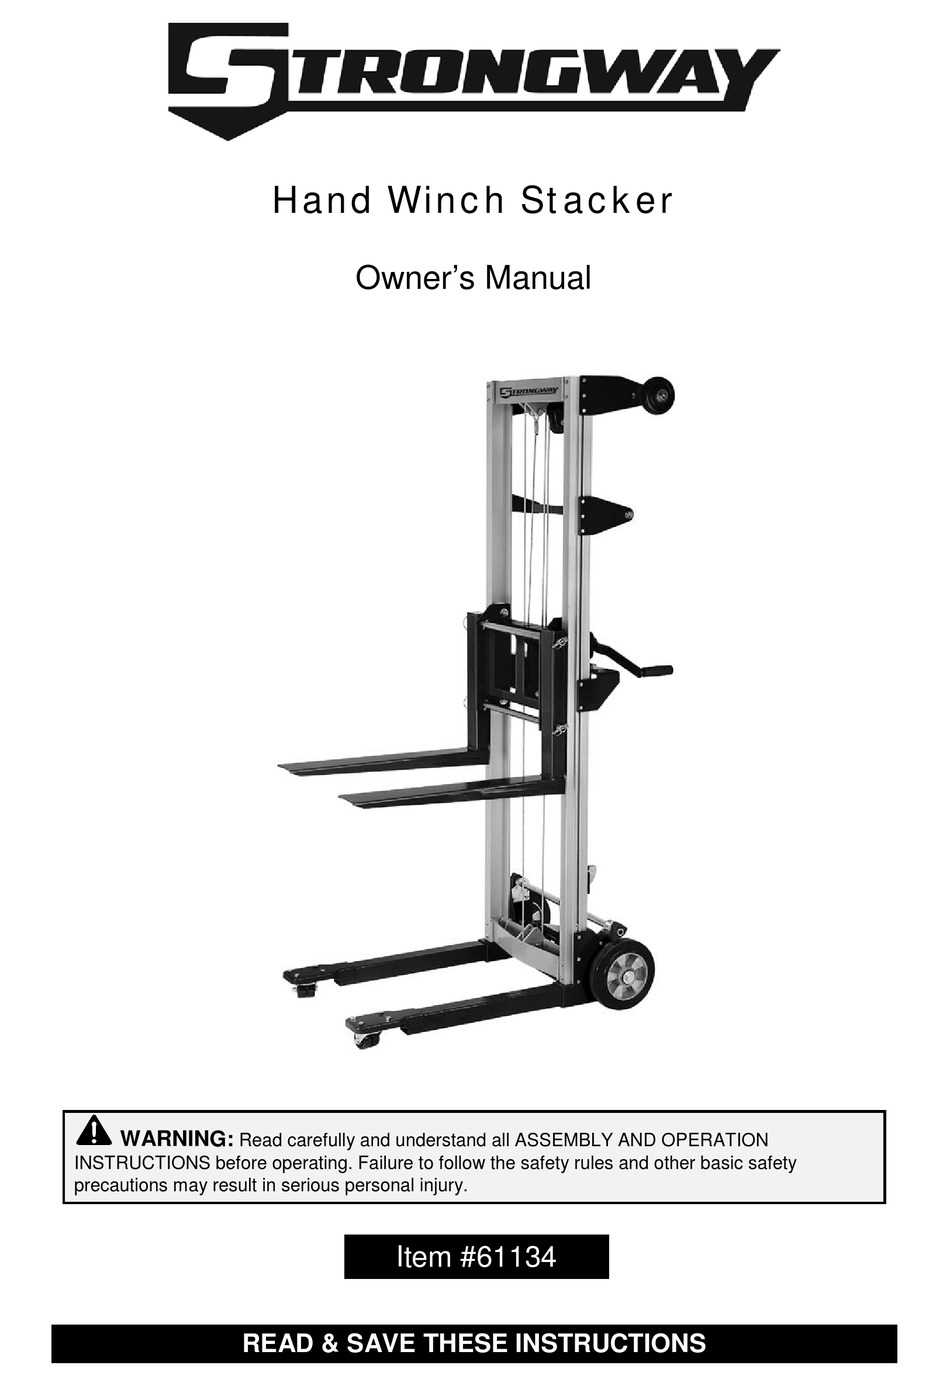 Exploded View And Parts List - Strongway 46434 Owner's Manual [Page 6]